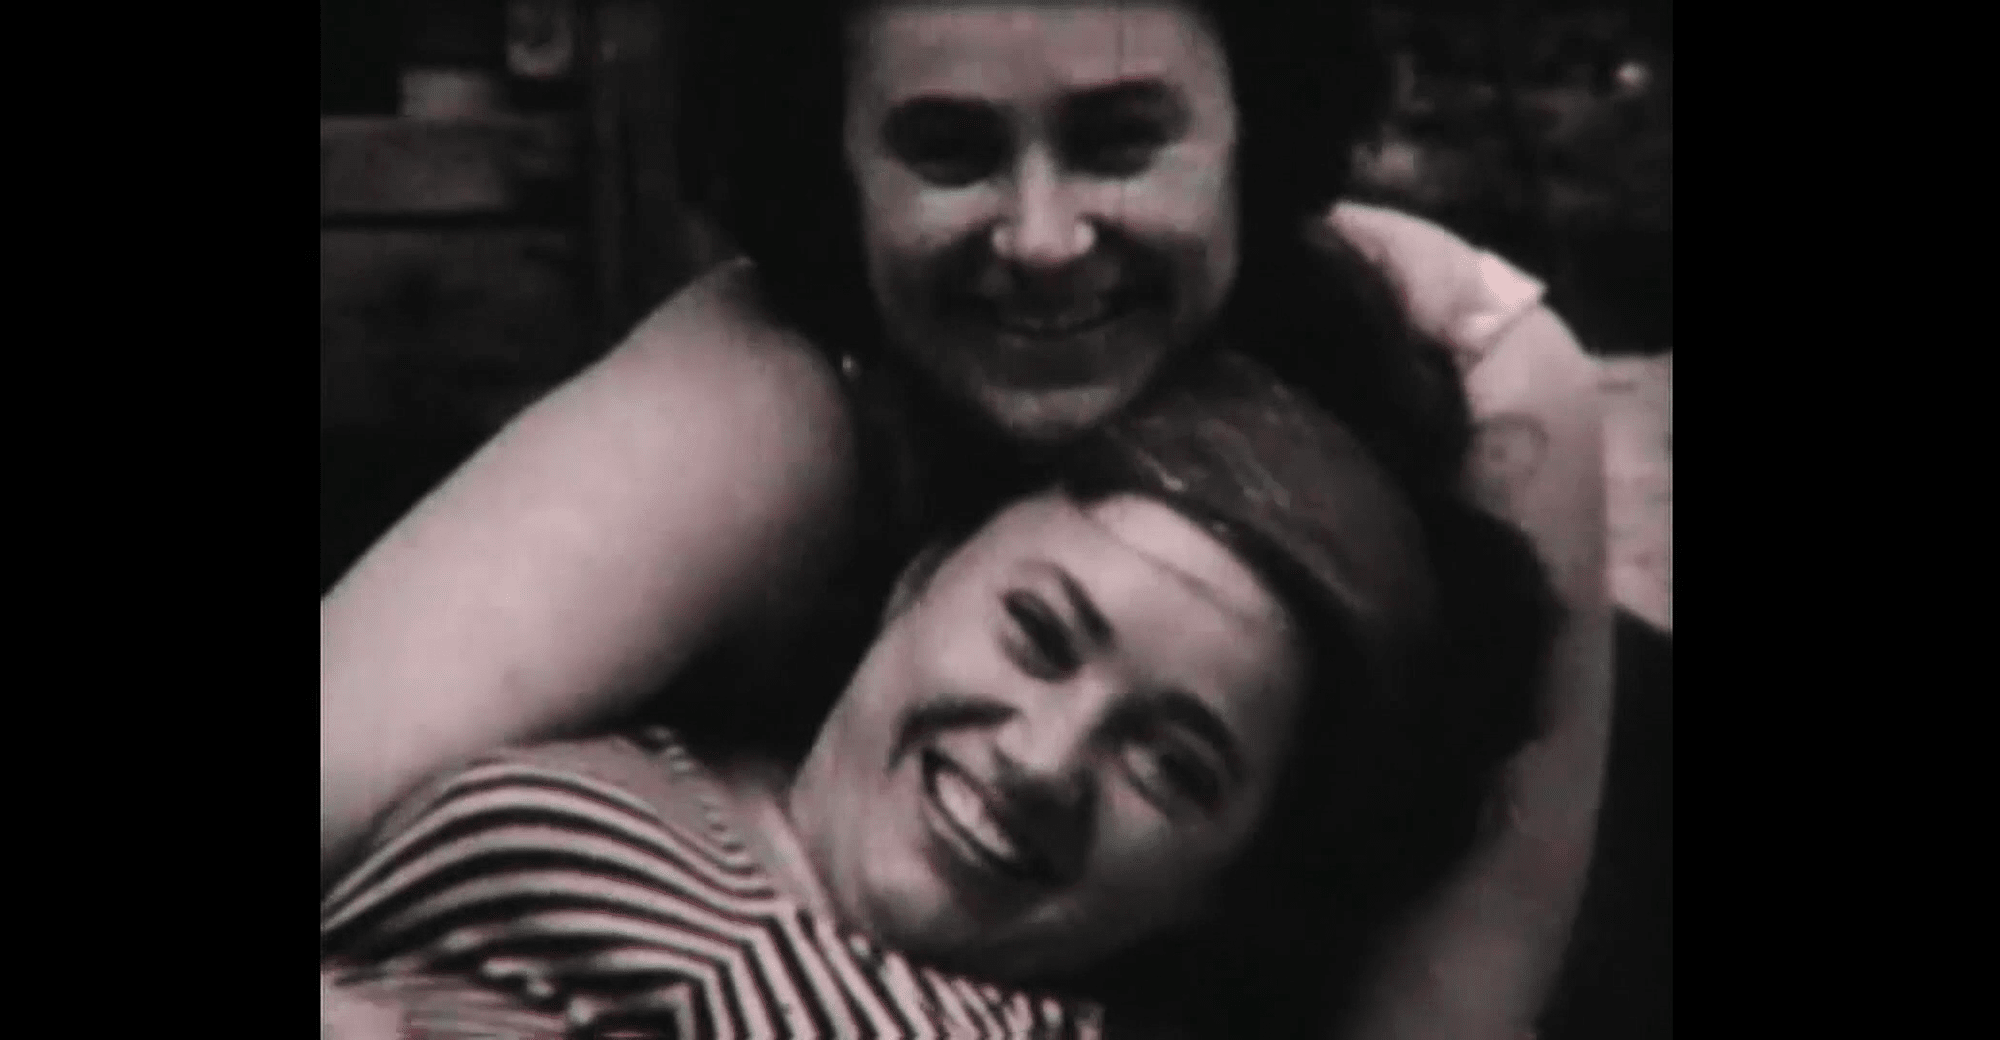 Still from the film "The Wonderful Years". Two-shot. Old black and white portrait of two smiling women, one hugging another. Both looking directly at the viewer.